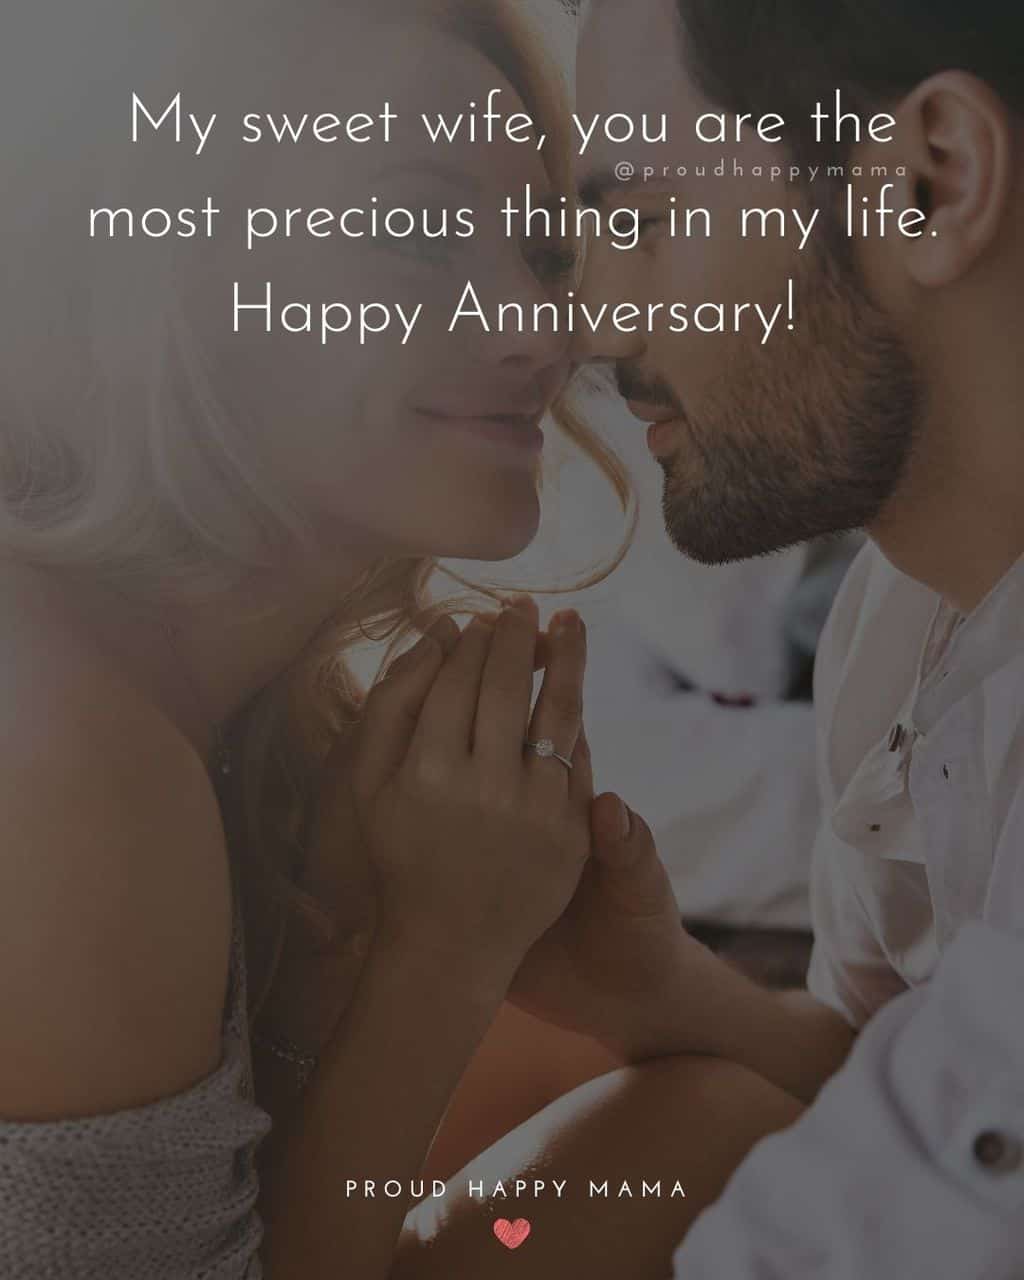 Wedding Anniversary Wishes For Wife - My sweet wife, you are the most precious thing in my life. Happy Anniversary!’